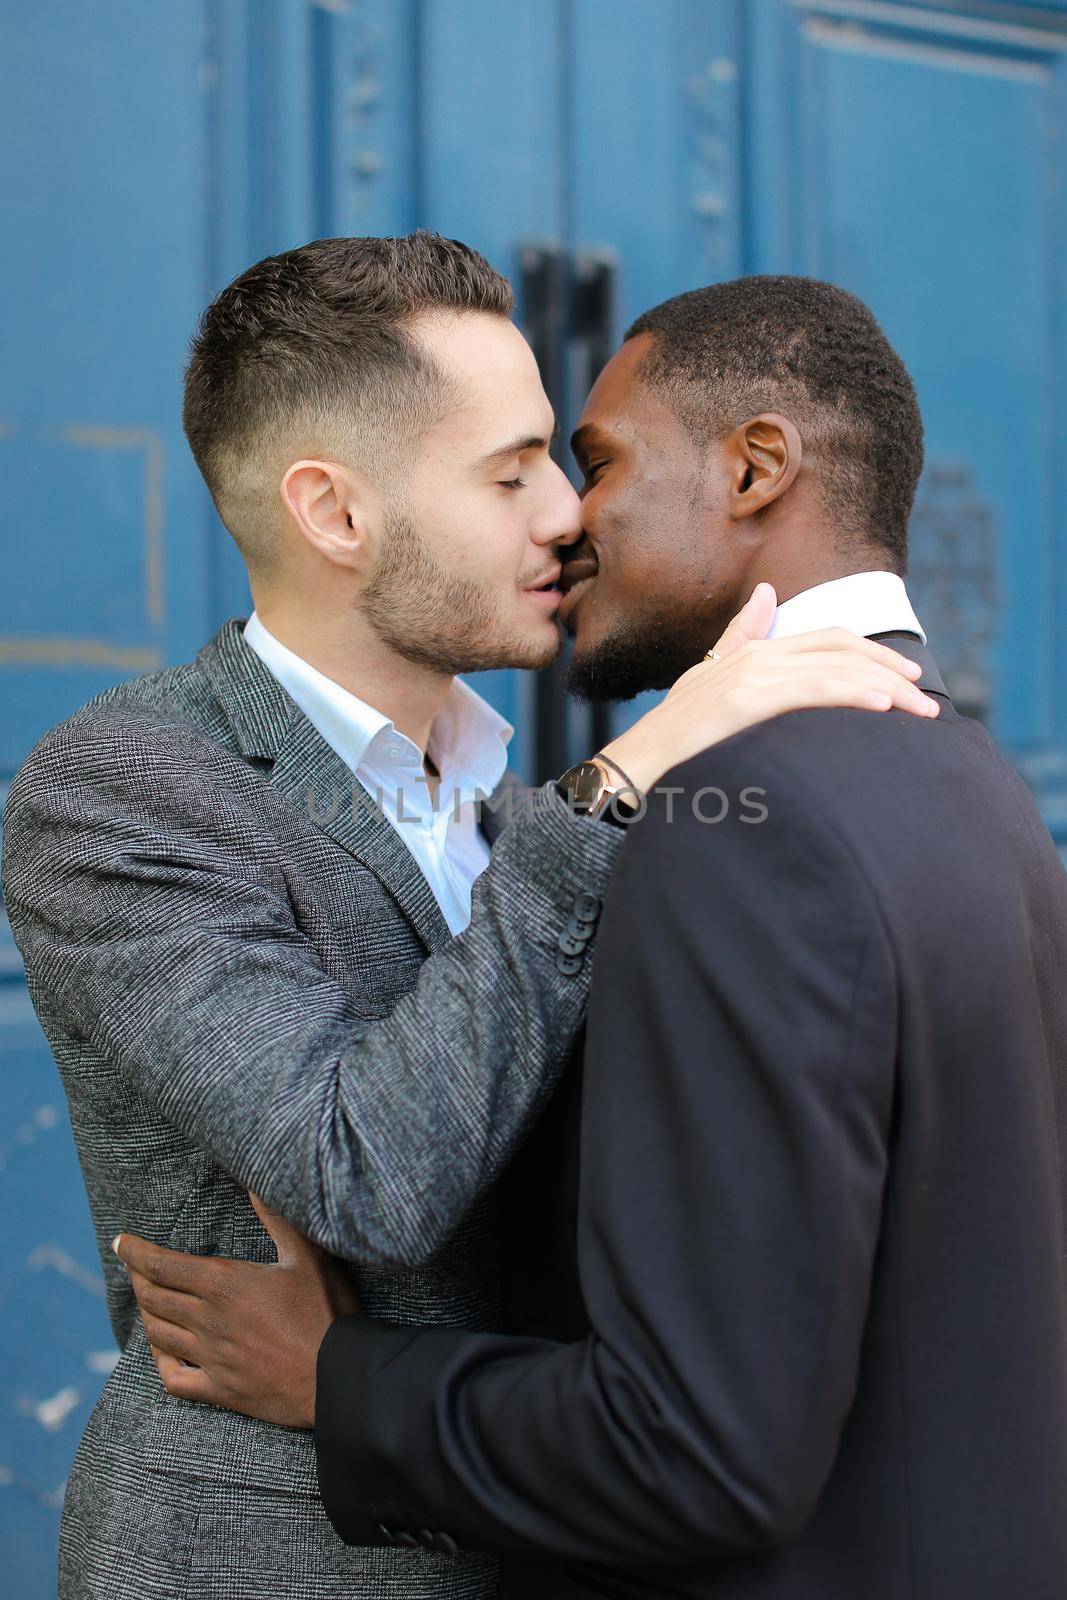 Caucasian happy man kissing afro american guy in door background. Concept of lgbt, gays and same sex couple.